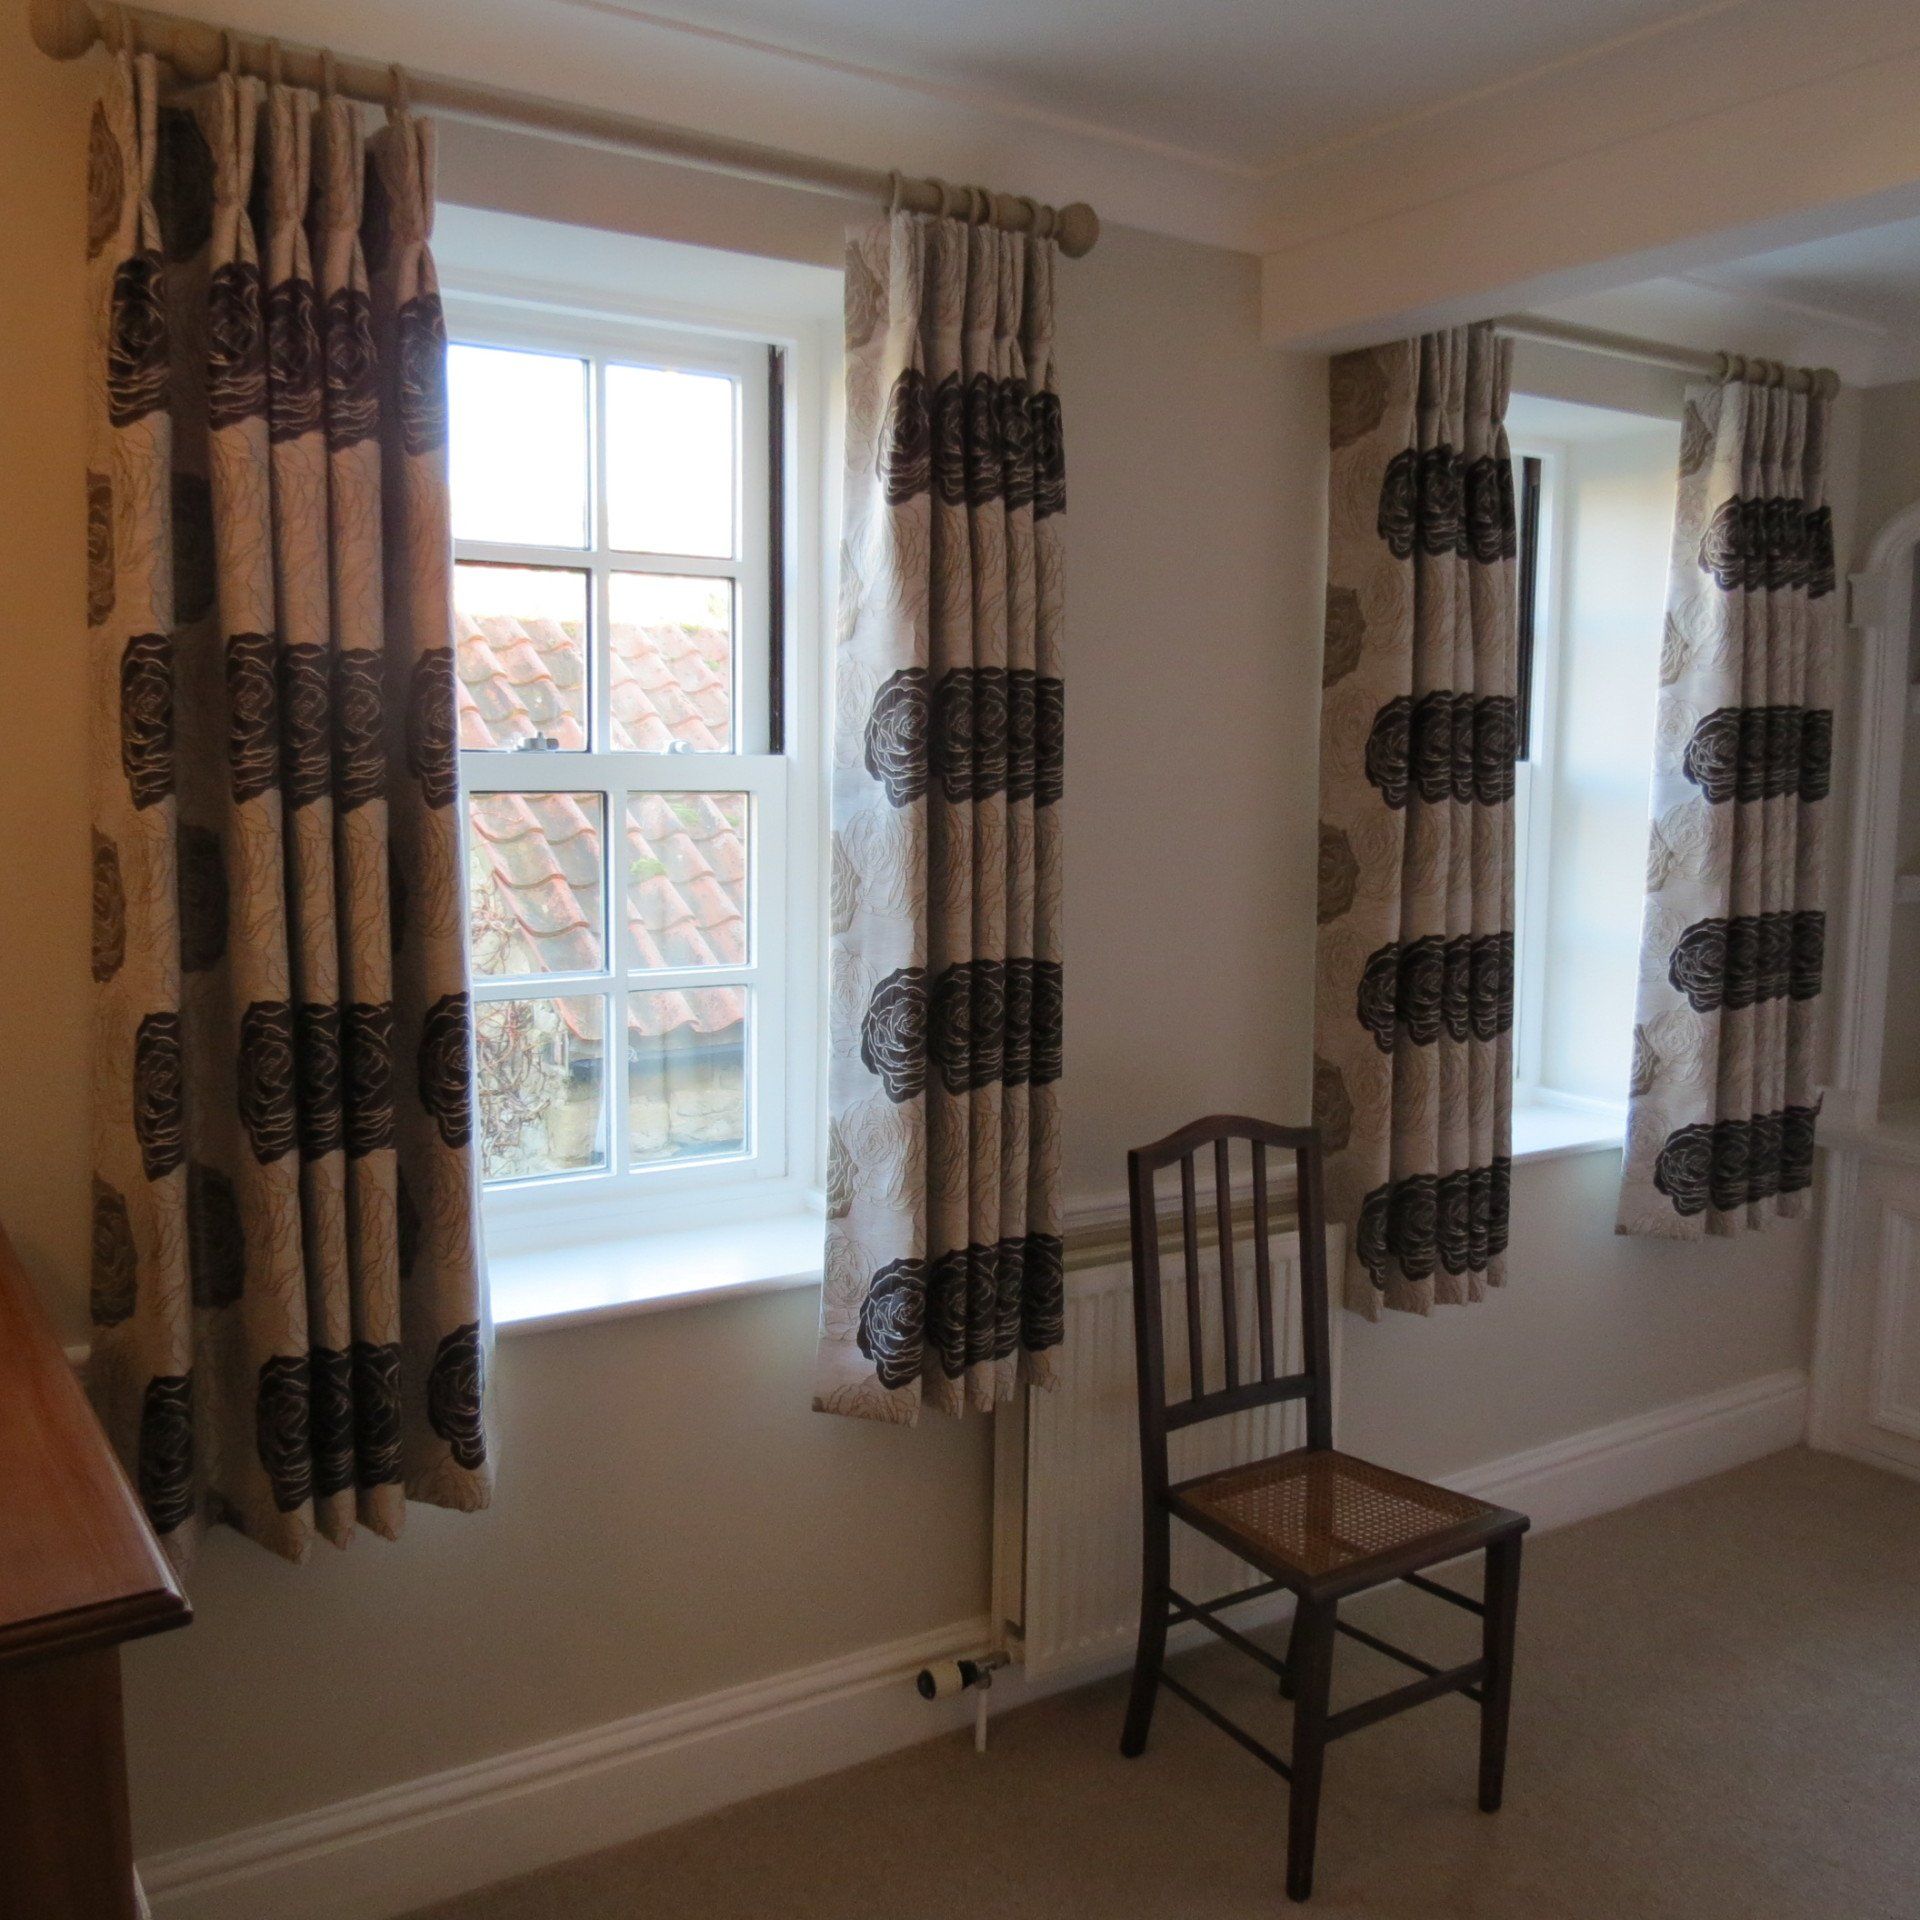 Cottage Curtains's curtain example 1